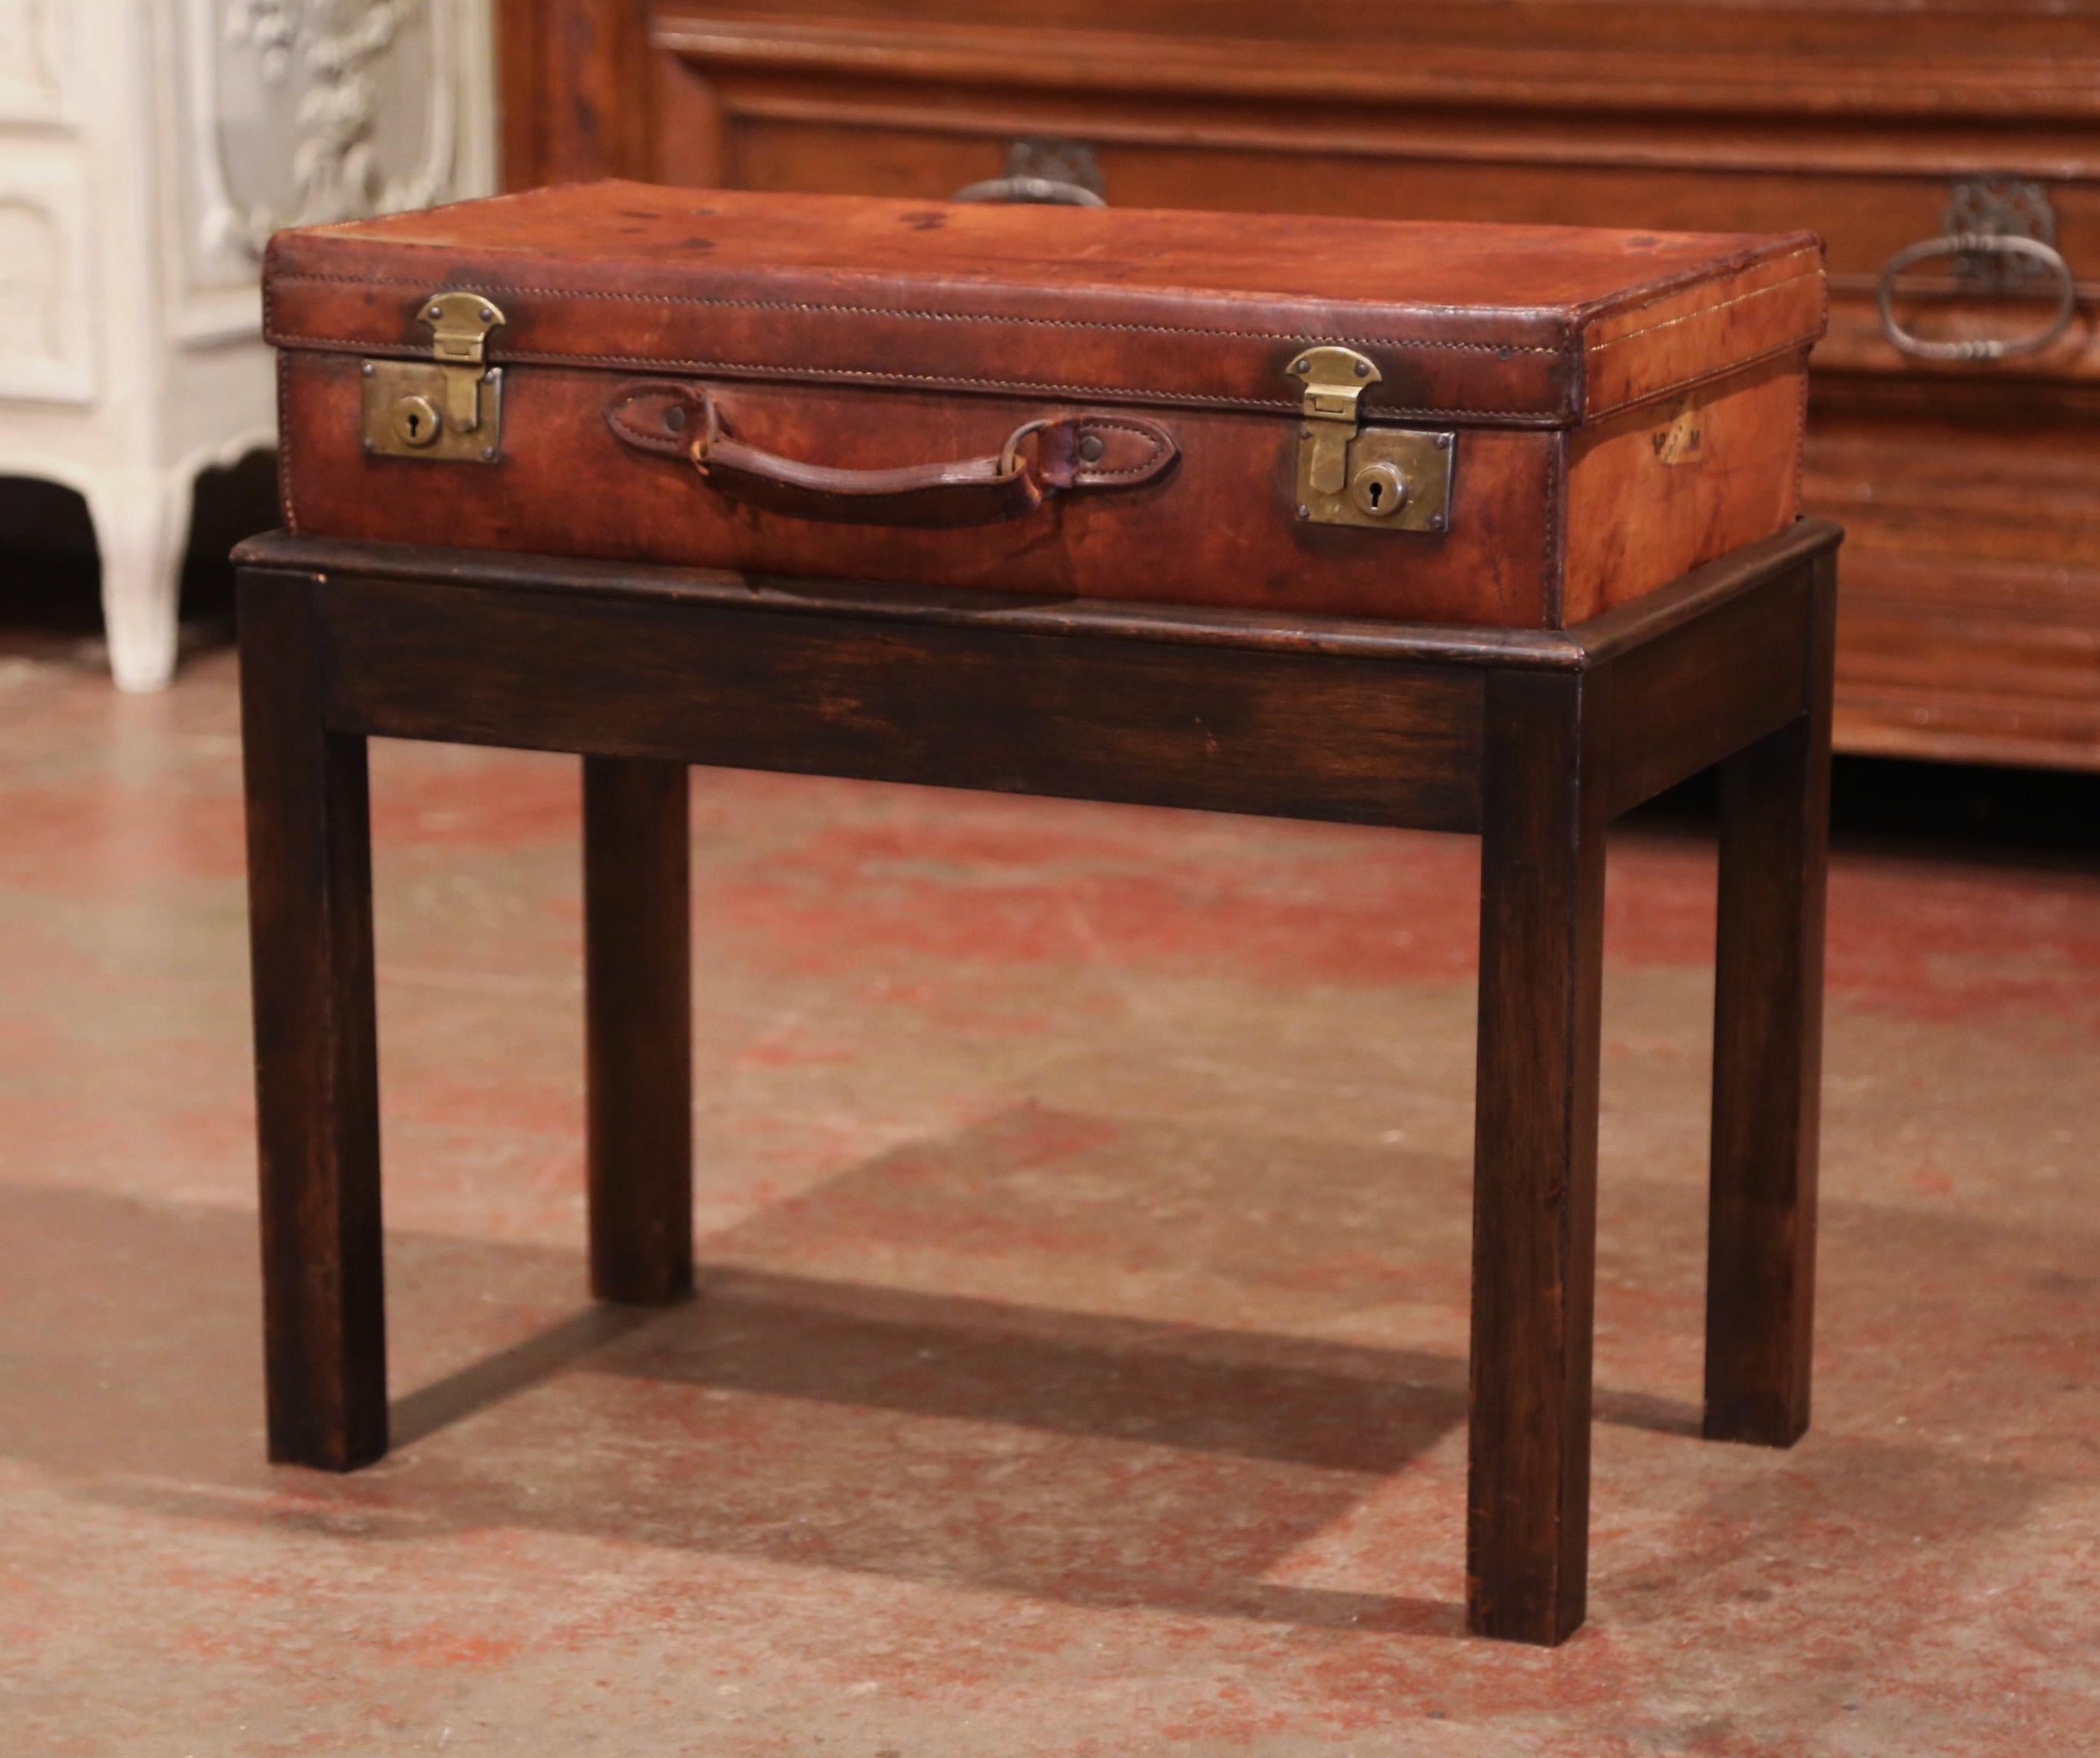 Rectangular in shape, this beautiful suitcase table would make an elegant side or occasional table, crafted in France circa 1890, the leather suitcase with front brass lock mechanism and central handle, is decorated on the top with embossed monogram